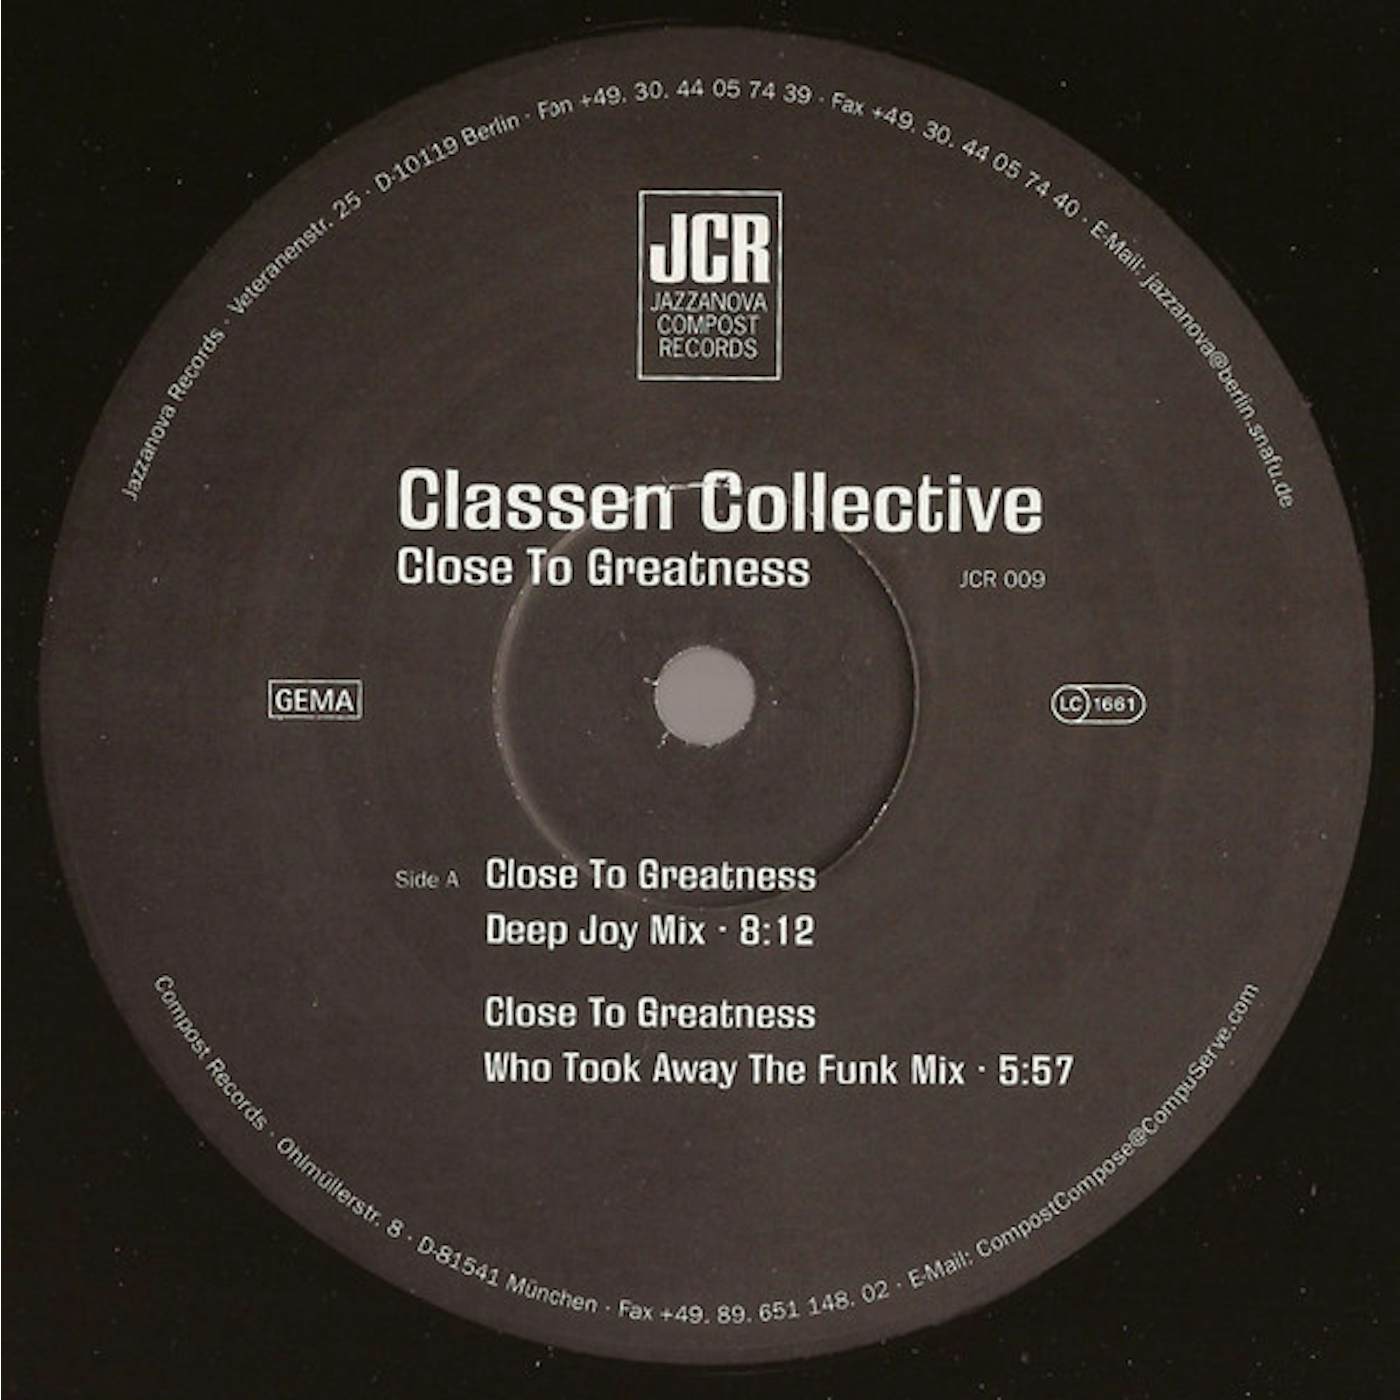 Classen Collective CLOSE TO GREATNESS Vinyl Record